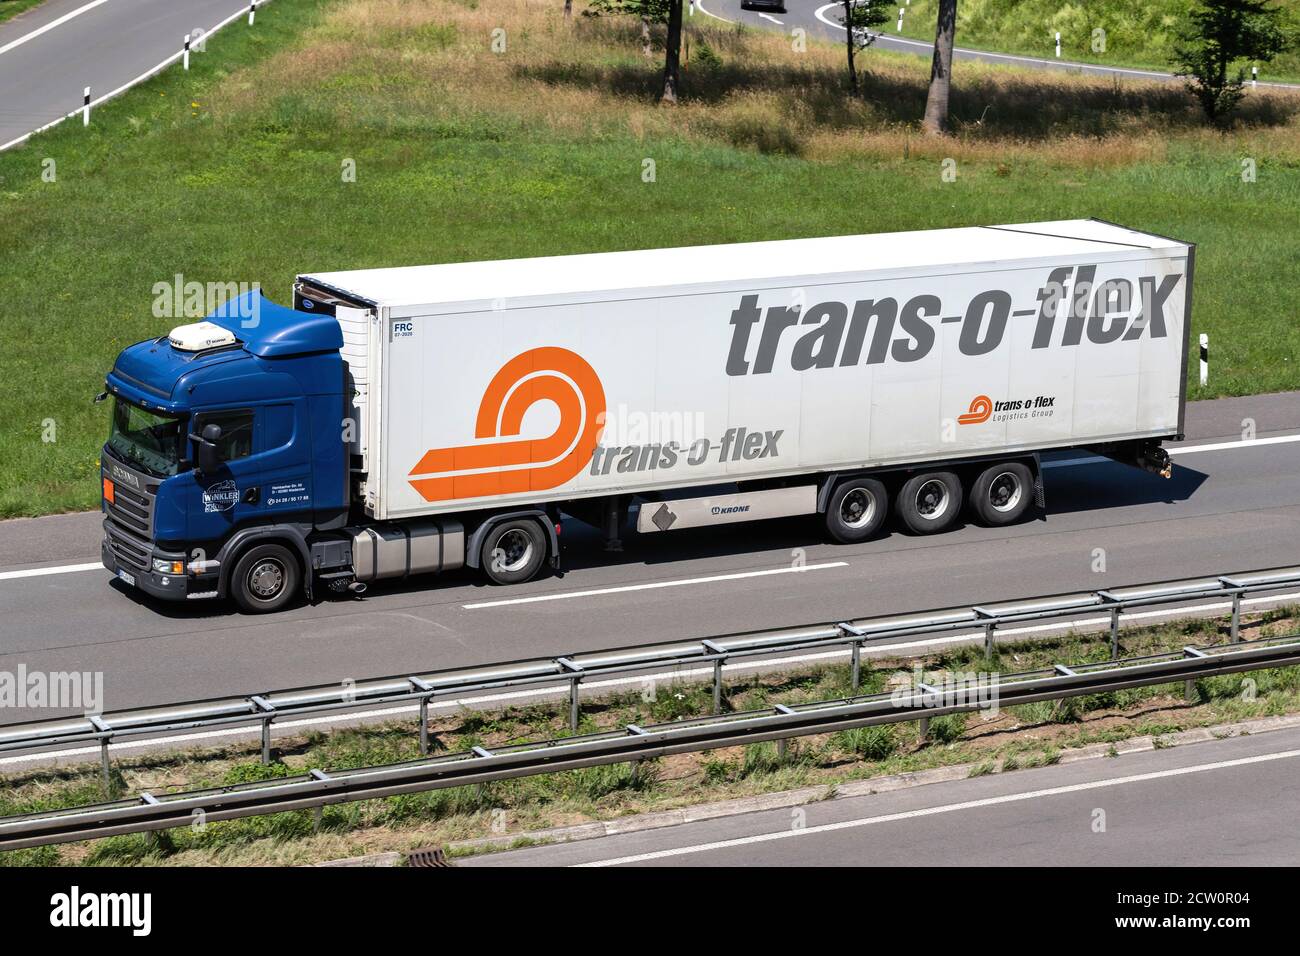 Winkler Scania R410 truck with temperature controlled trans-o-flex trailer on motorway. Stock Photo